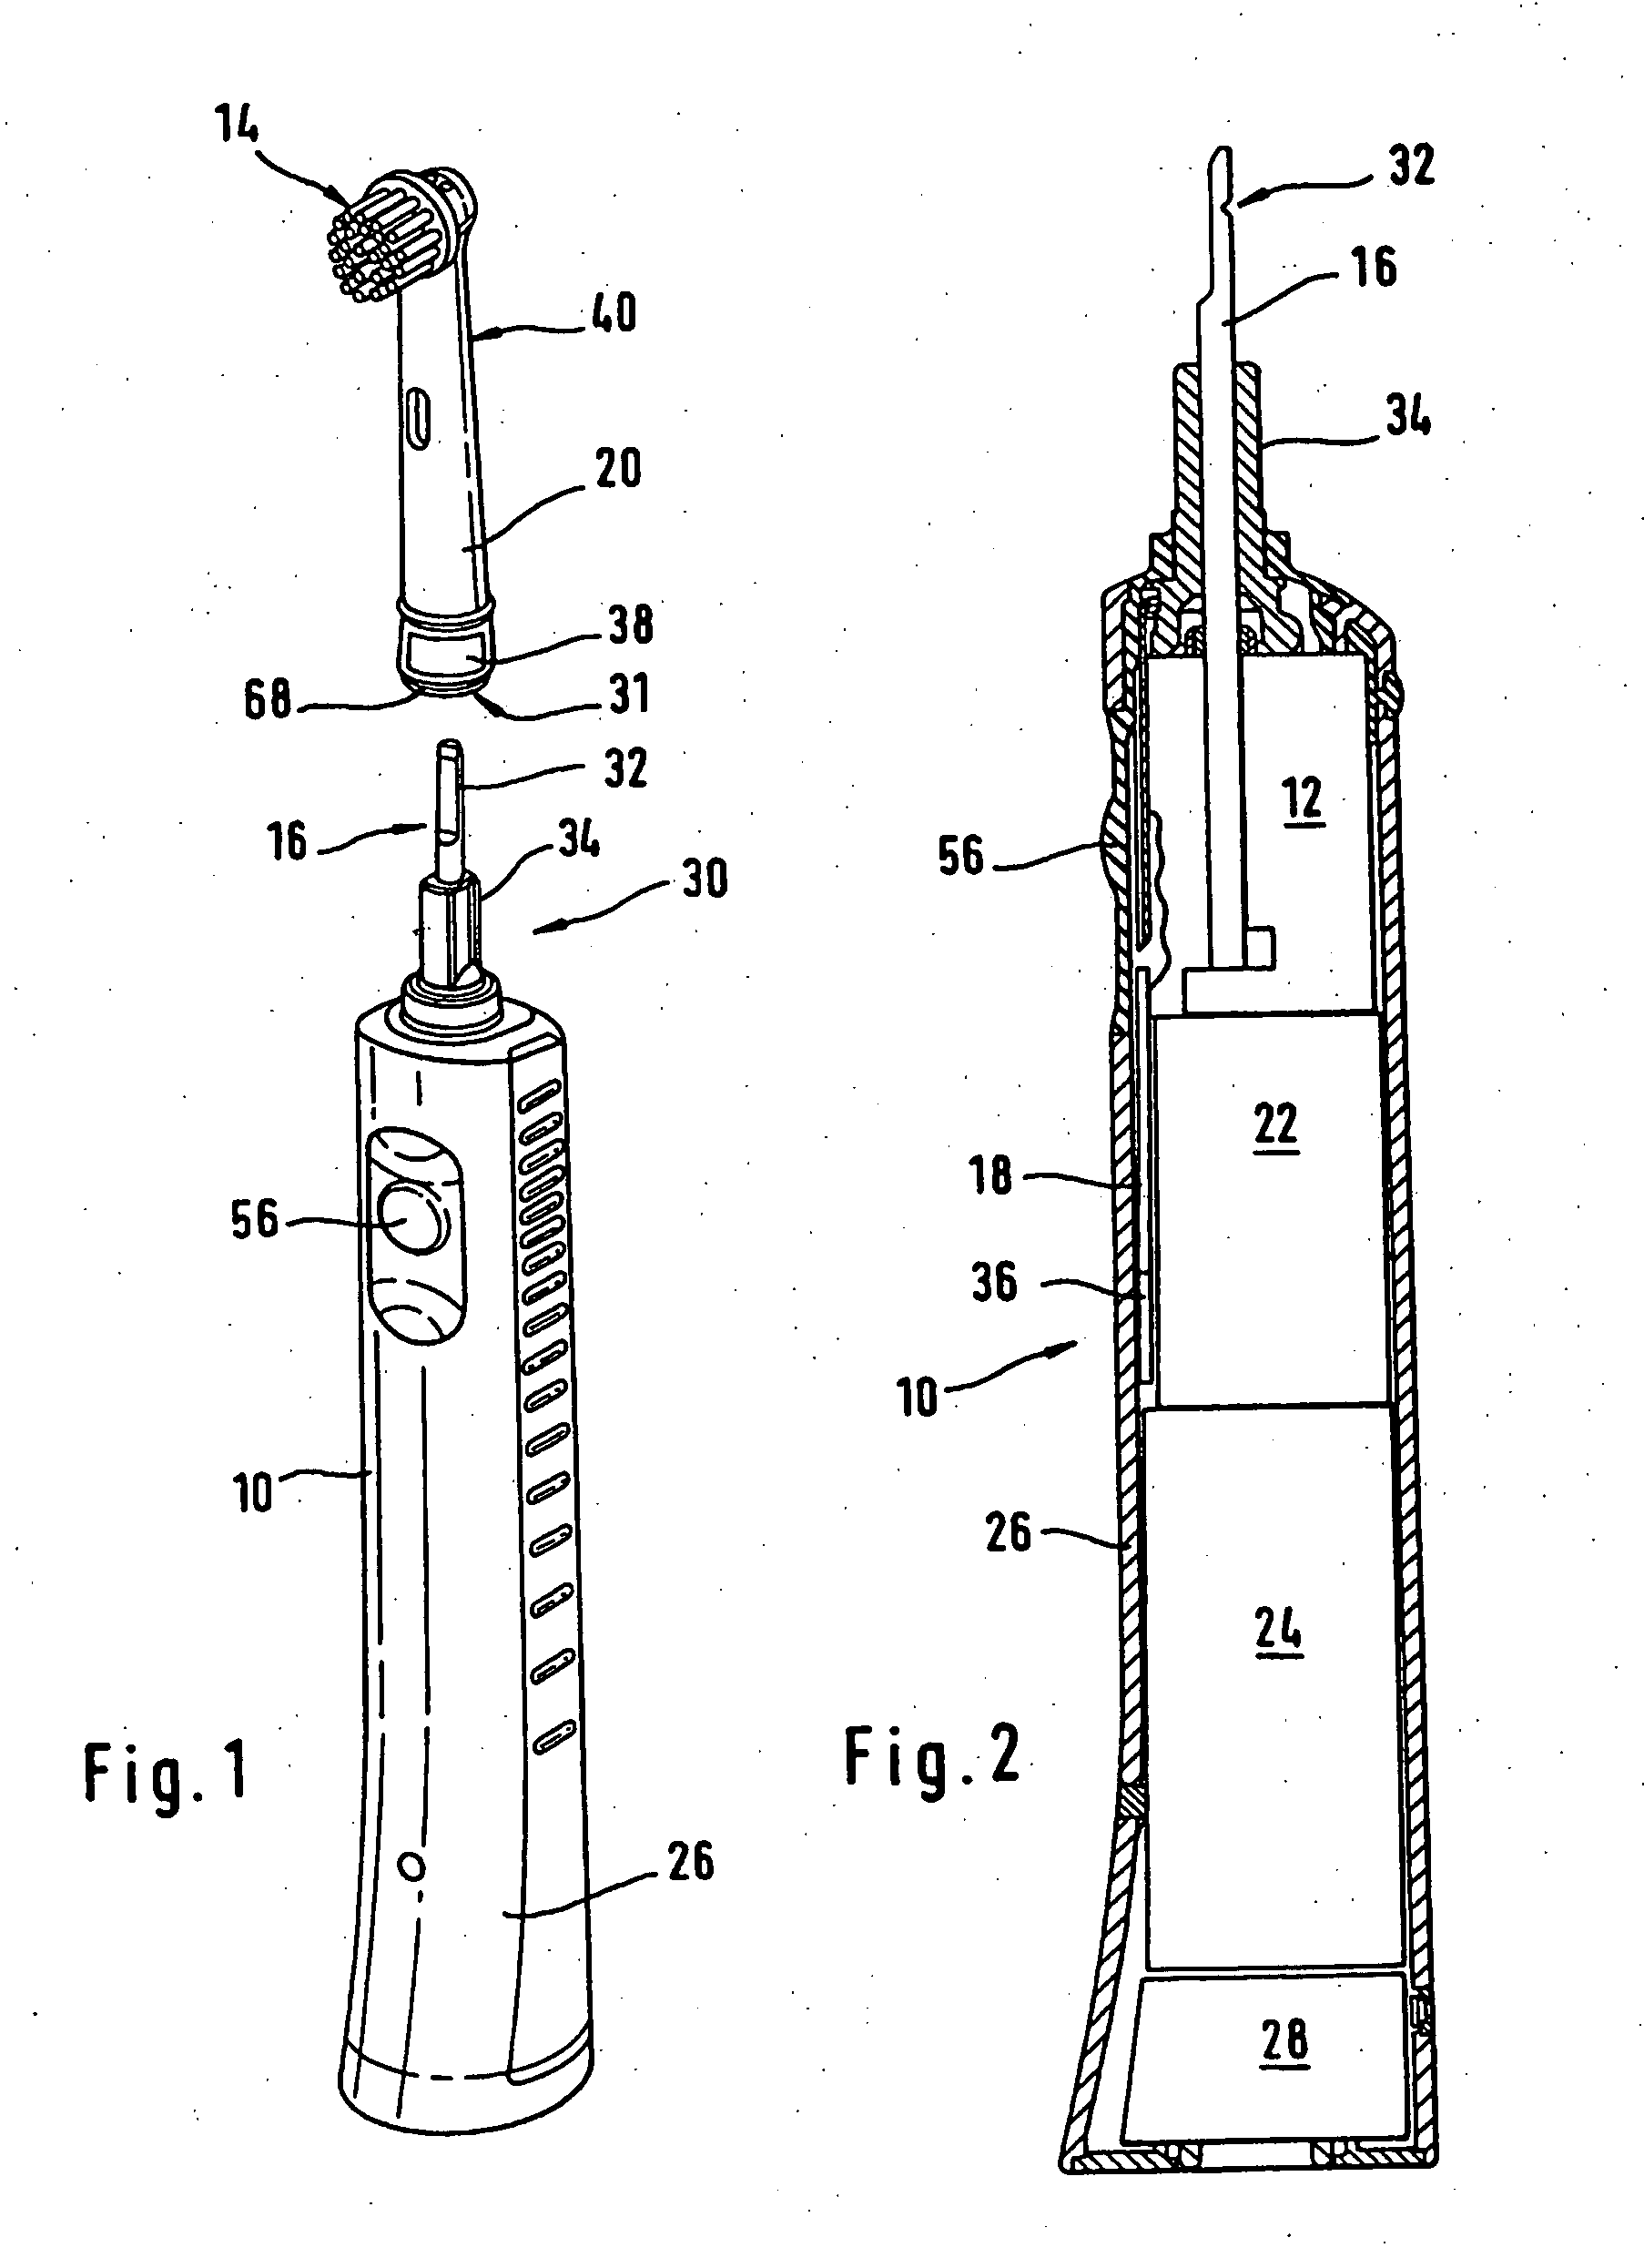 Dental cleaning device